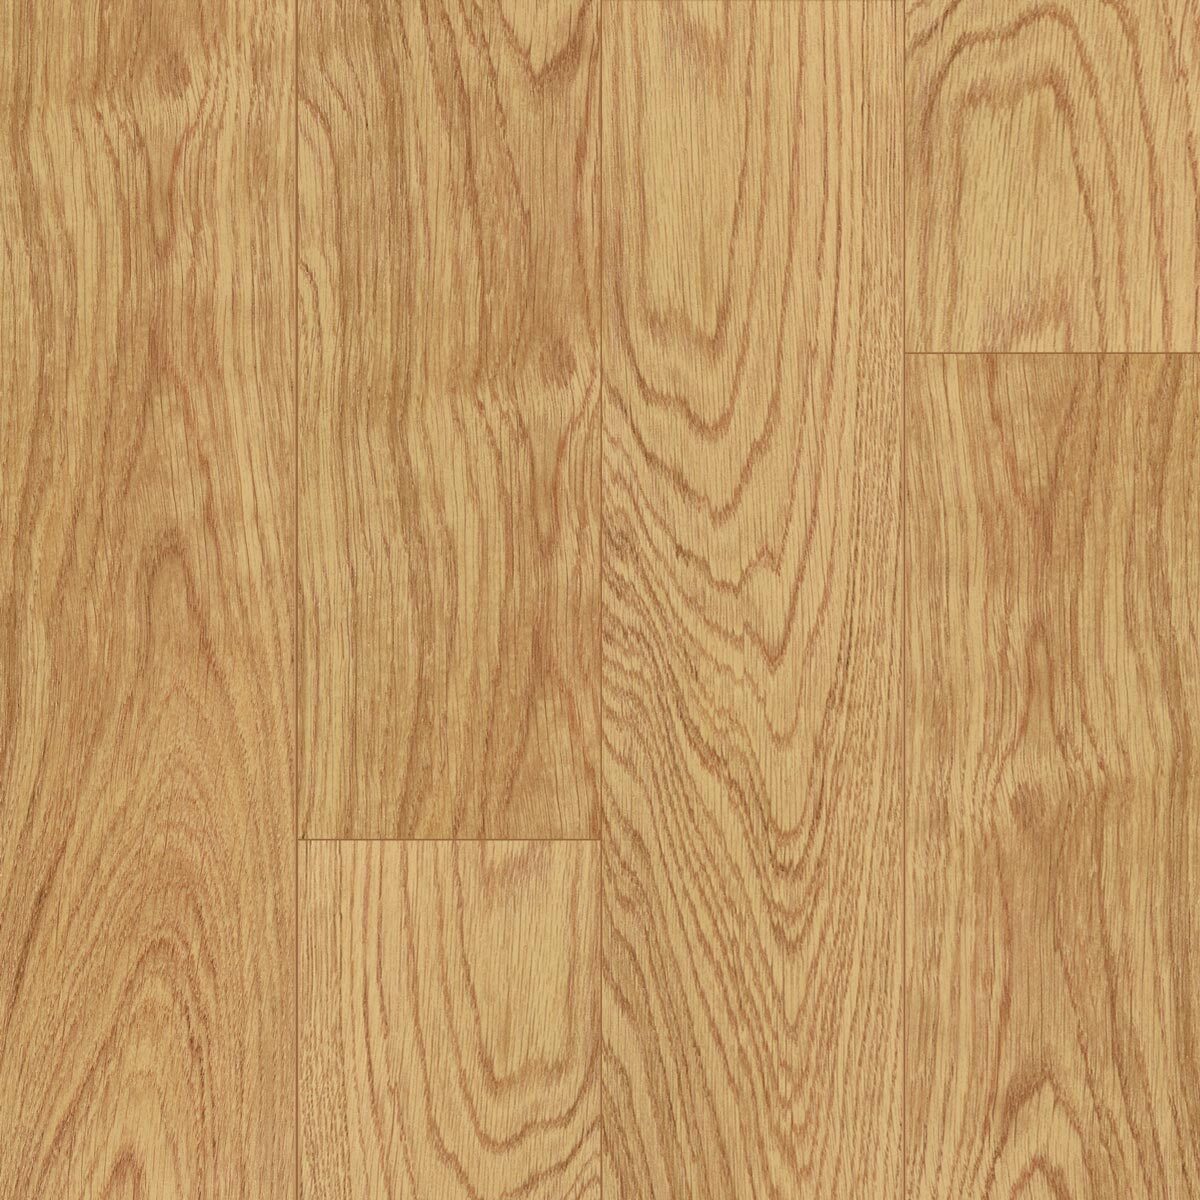 Close up image of installed flooring pattern